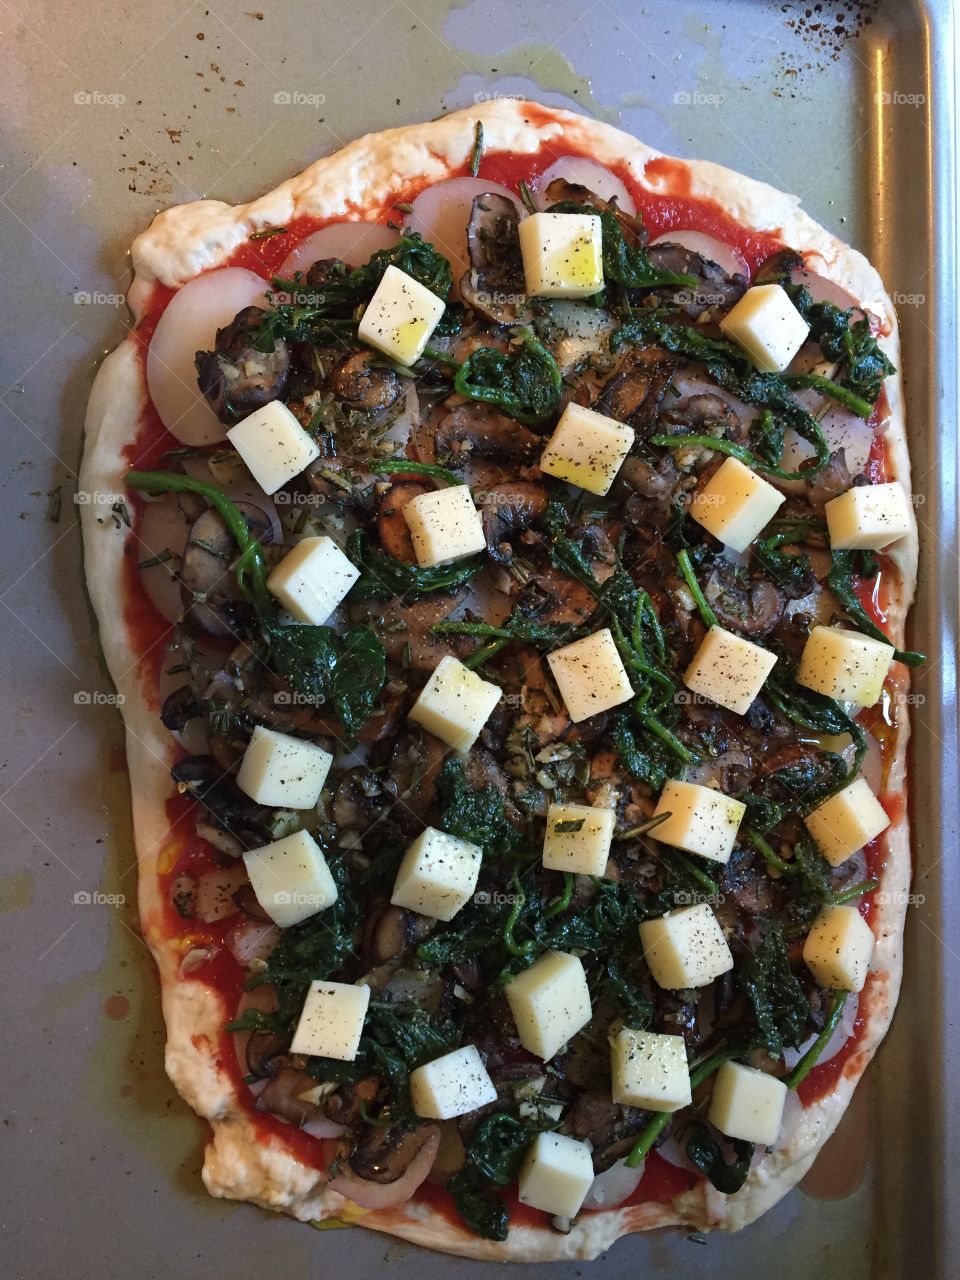 Fresh ingredients on a non-traditional homemade pizza....before it goes in the oven.  Delicious sauce, potatoes, mushrooms, and cubes of cheese on top with a little salt and pepper.  Yum!